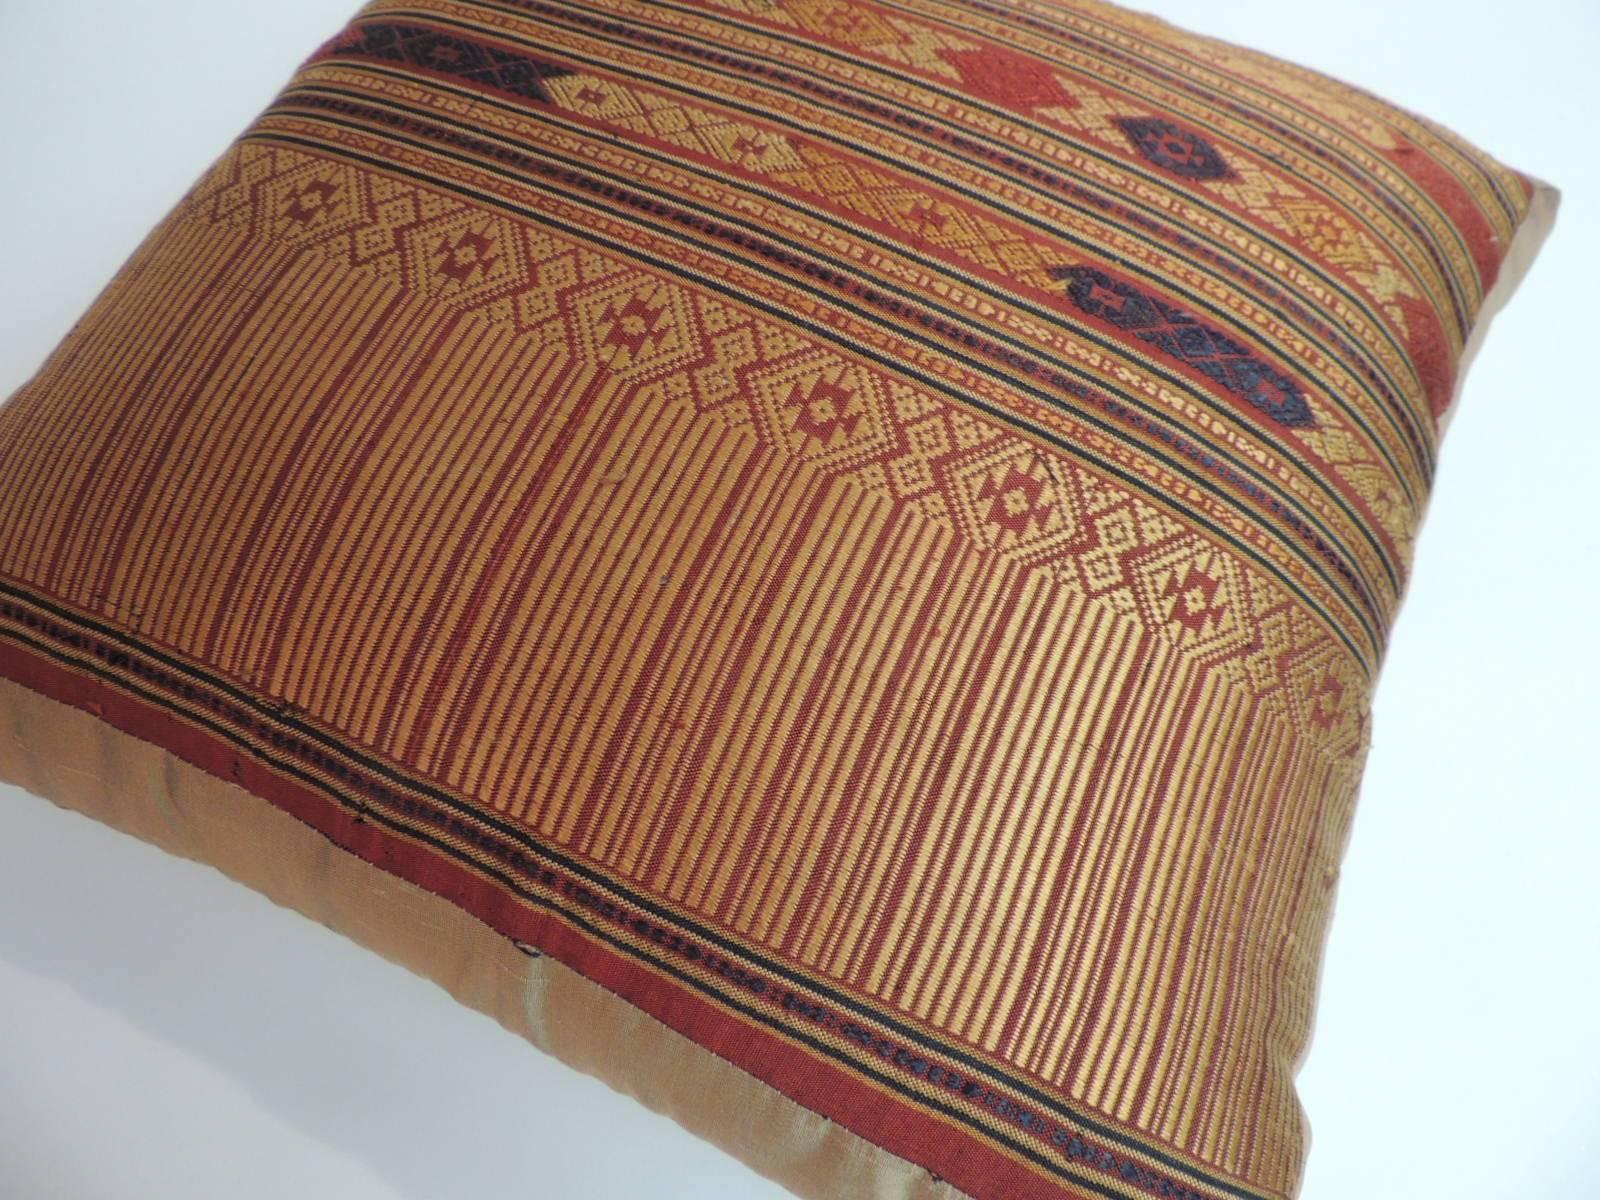 Tribal Vintage Silk Floss Embroidery Decorative Pillow from Laos